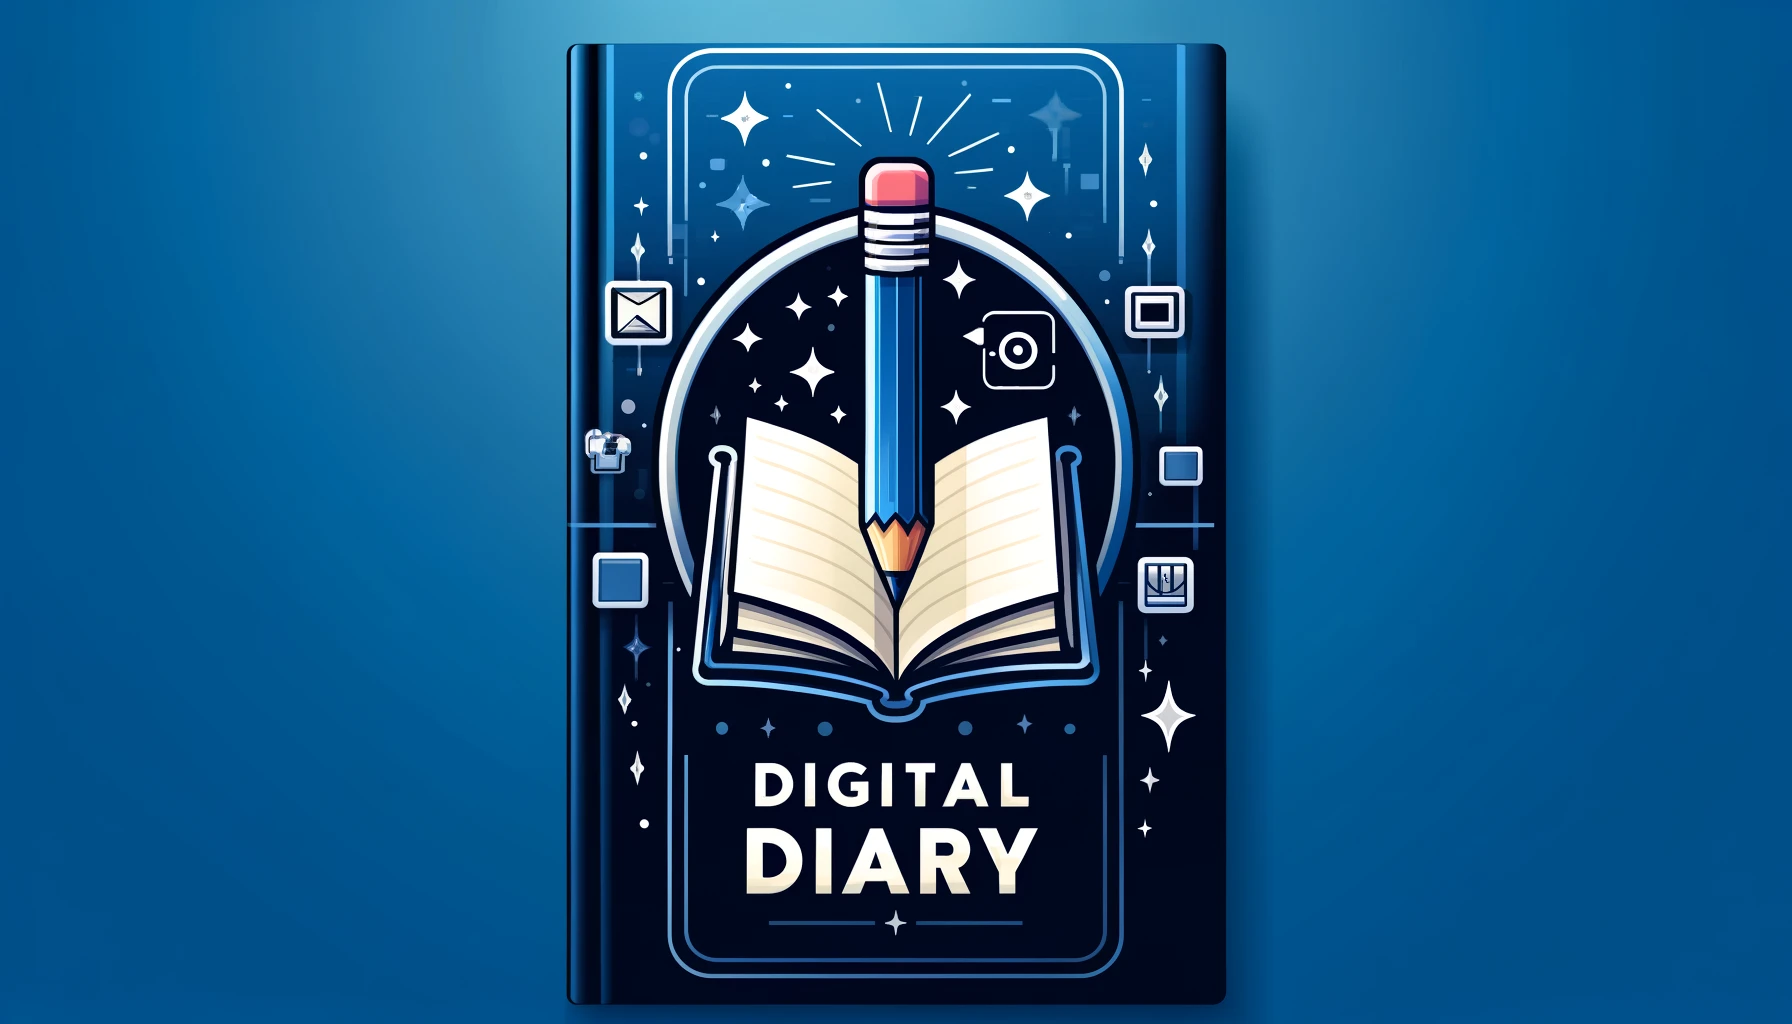 An image of the Digital Diary project.